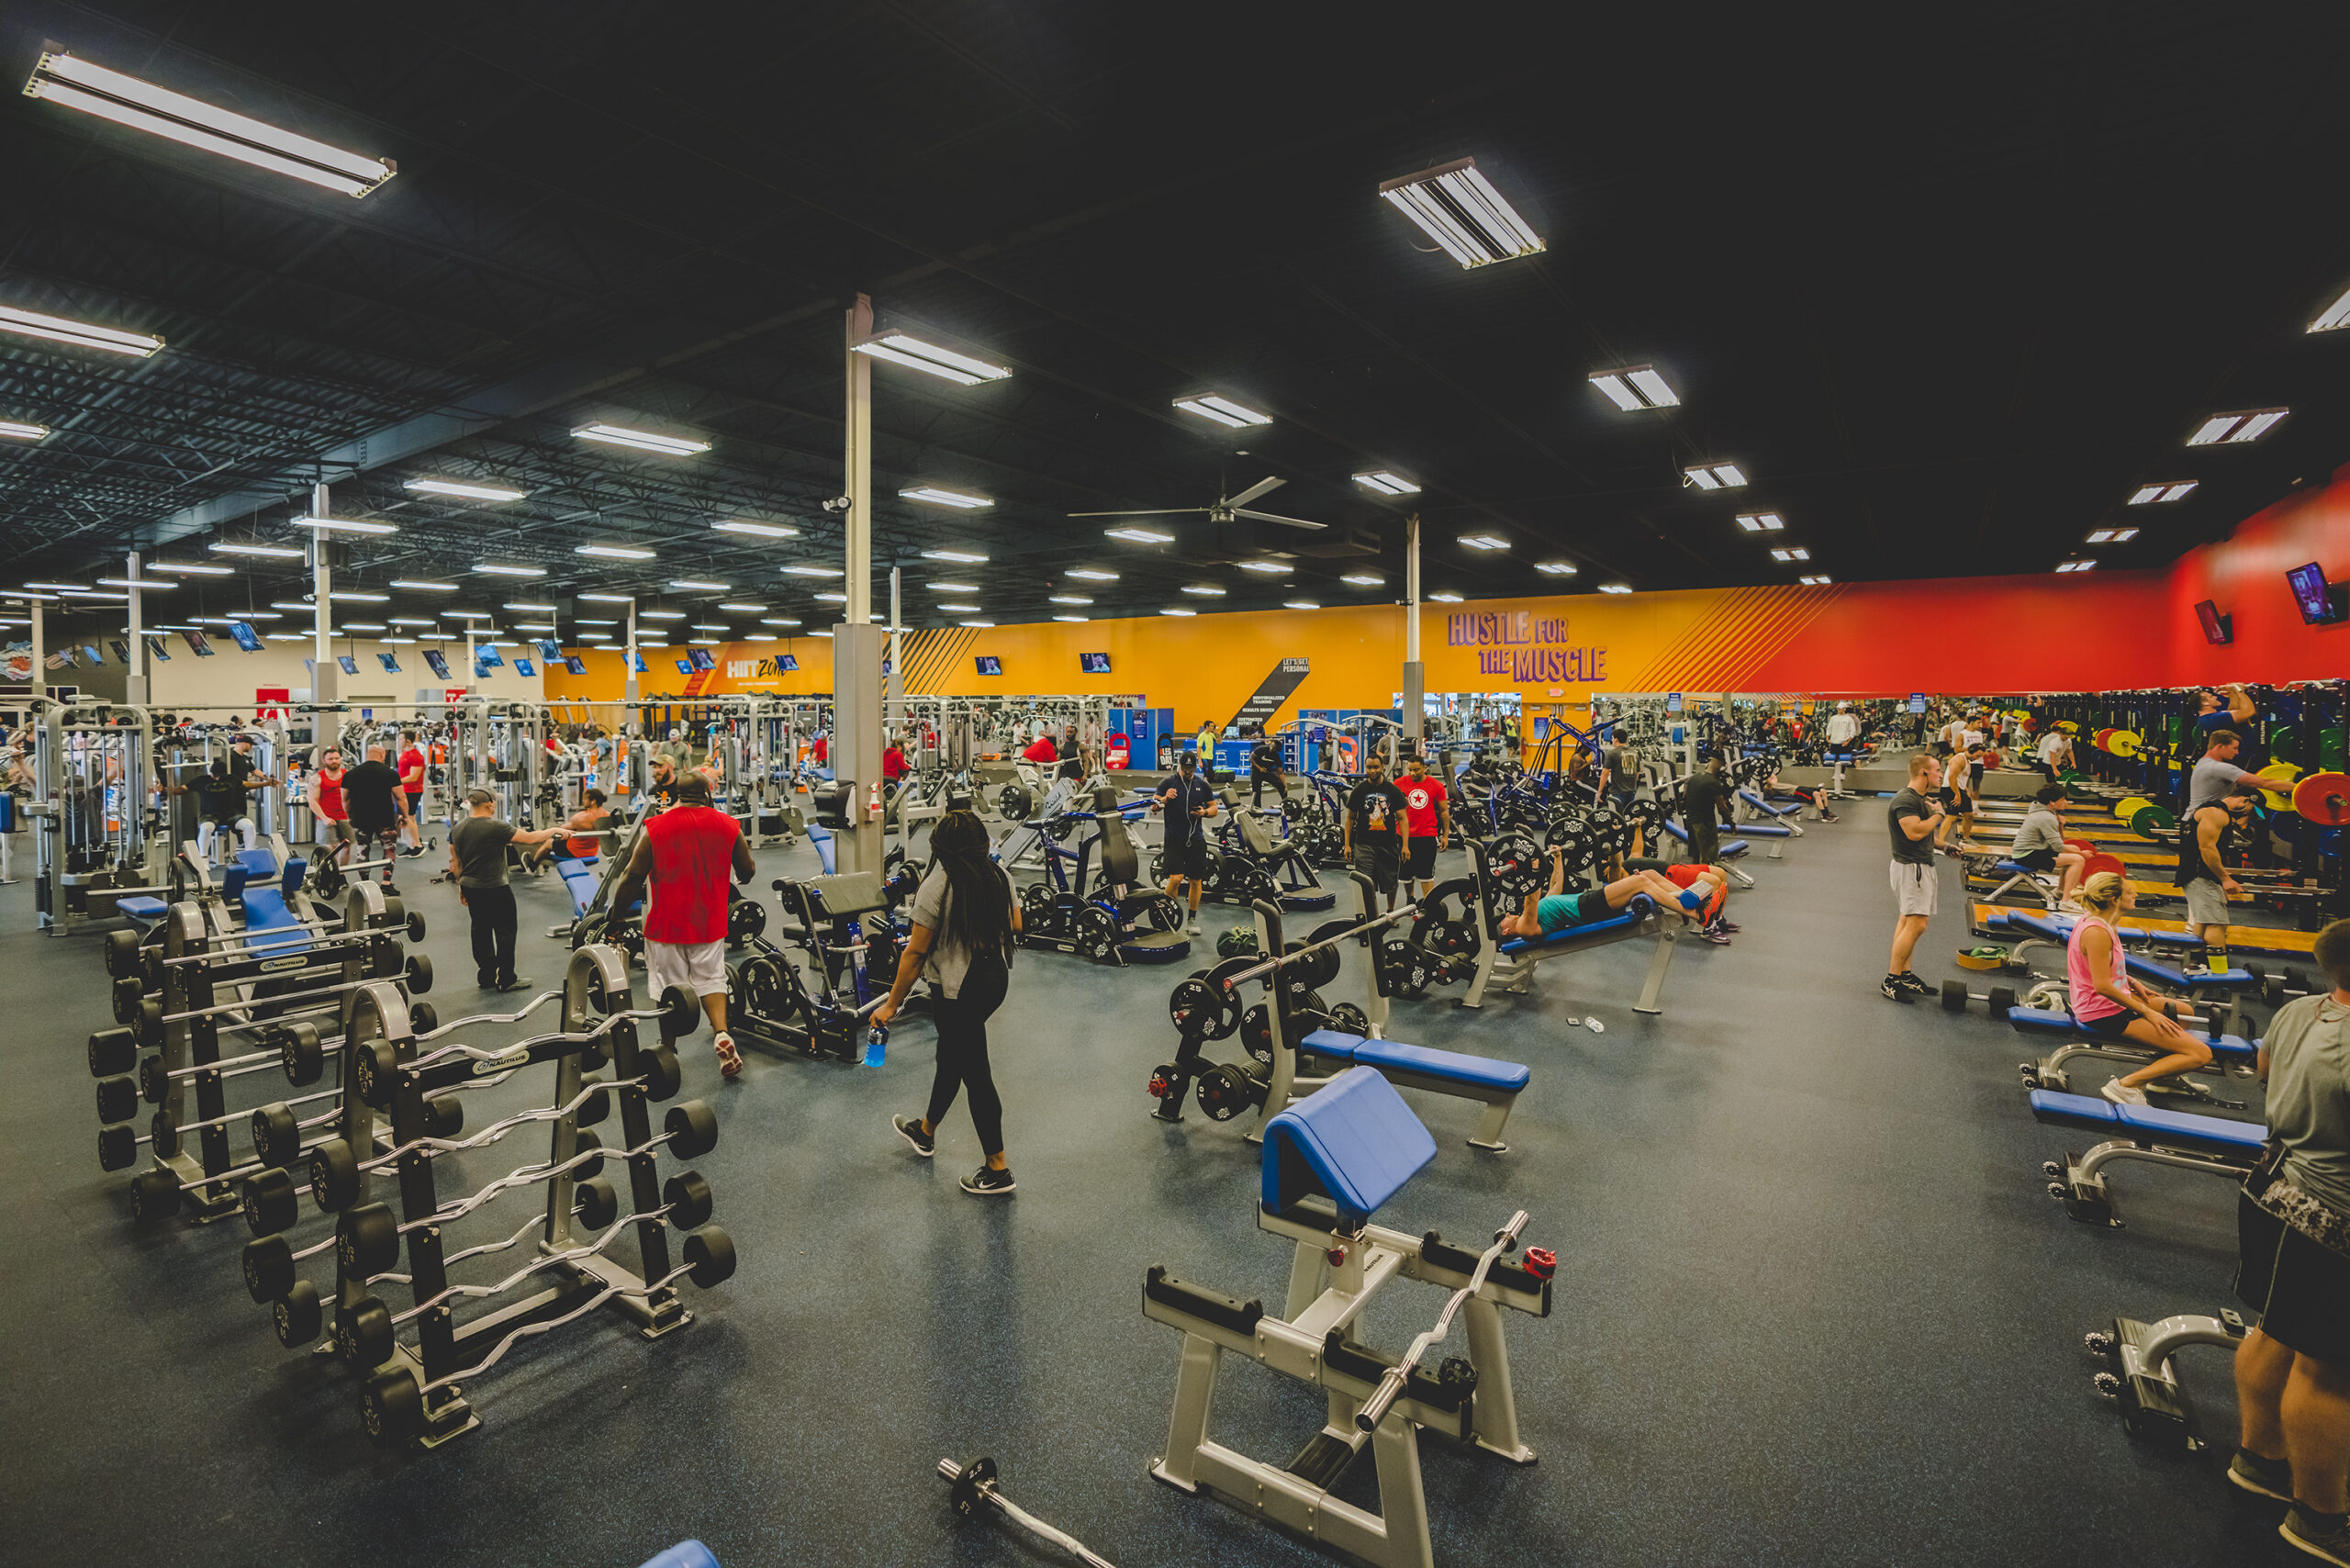 A large workout room at Crunch Fitness with free weights, machines, and bar weights.